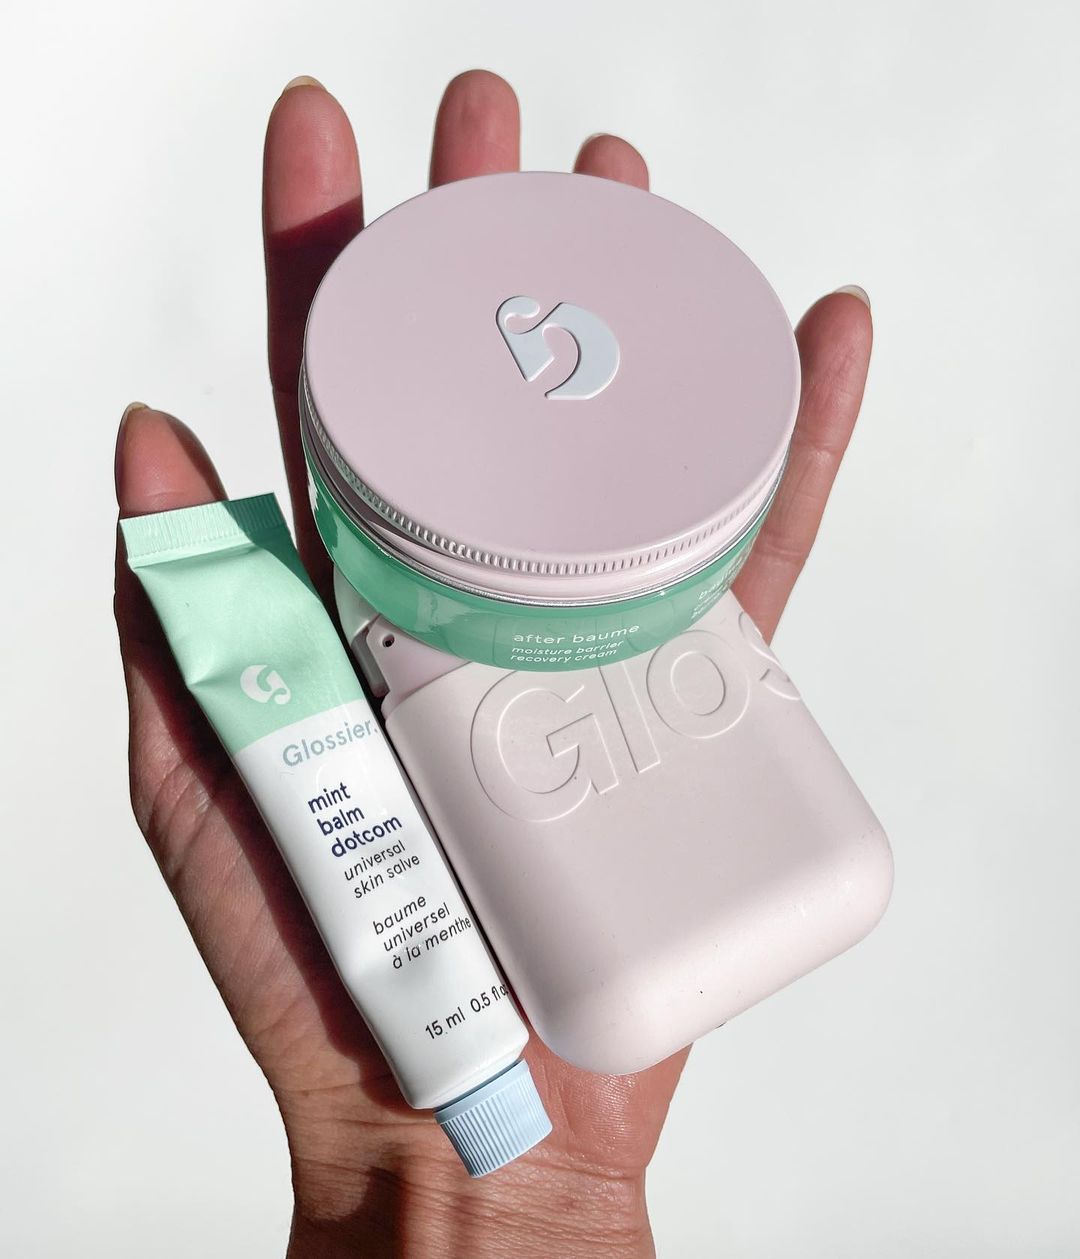 There is a hand holding up three products. The first, on the right, is a lip balm in a long squeeze tube container. The top product is in a circular container with a pink lid. And then bottom product is a rectangular pink container with a rounded edge.